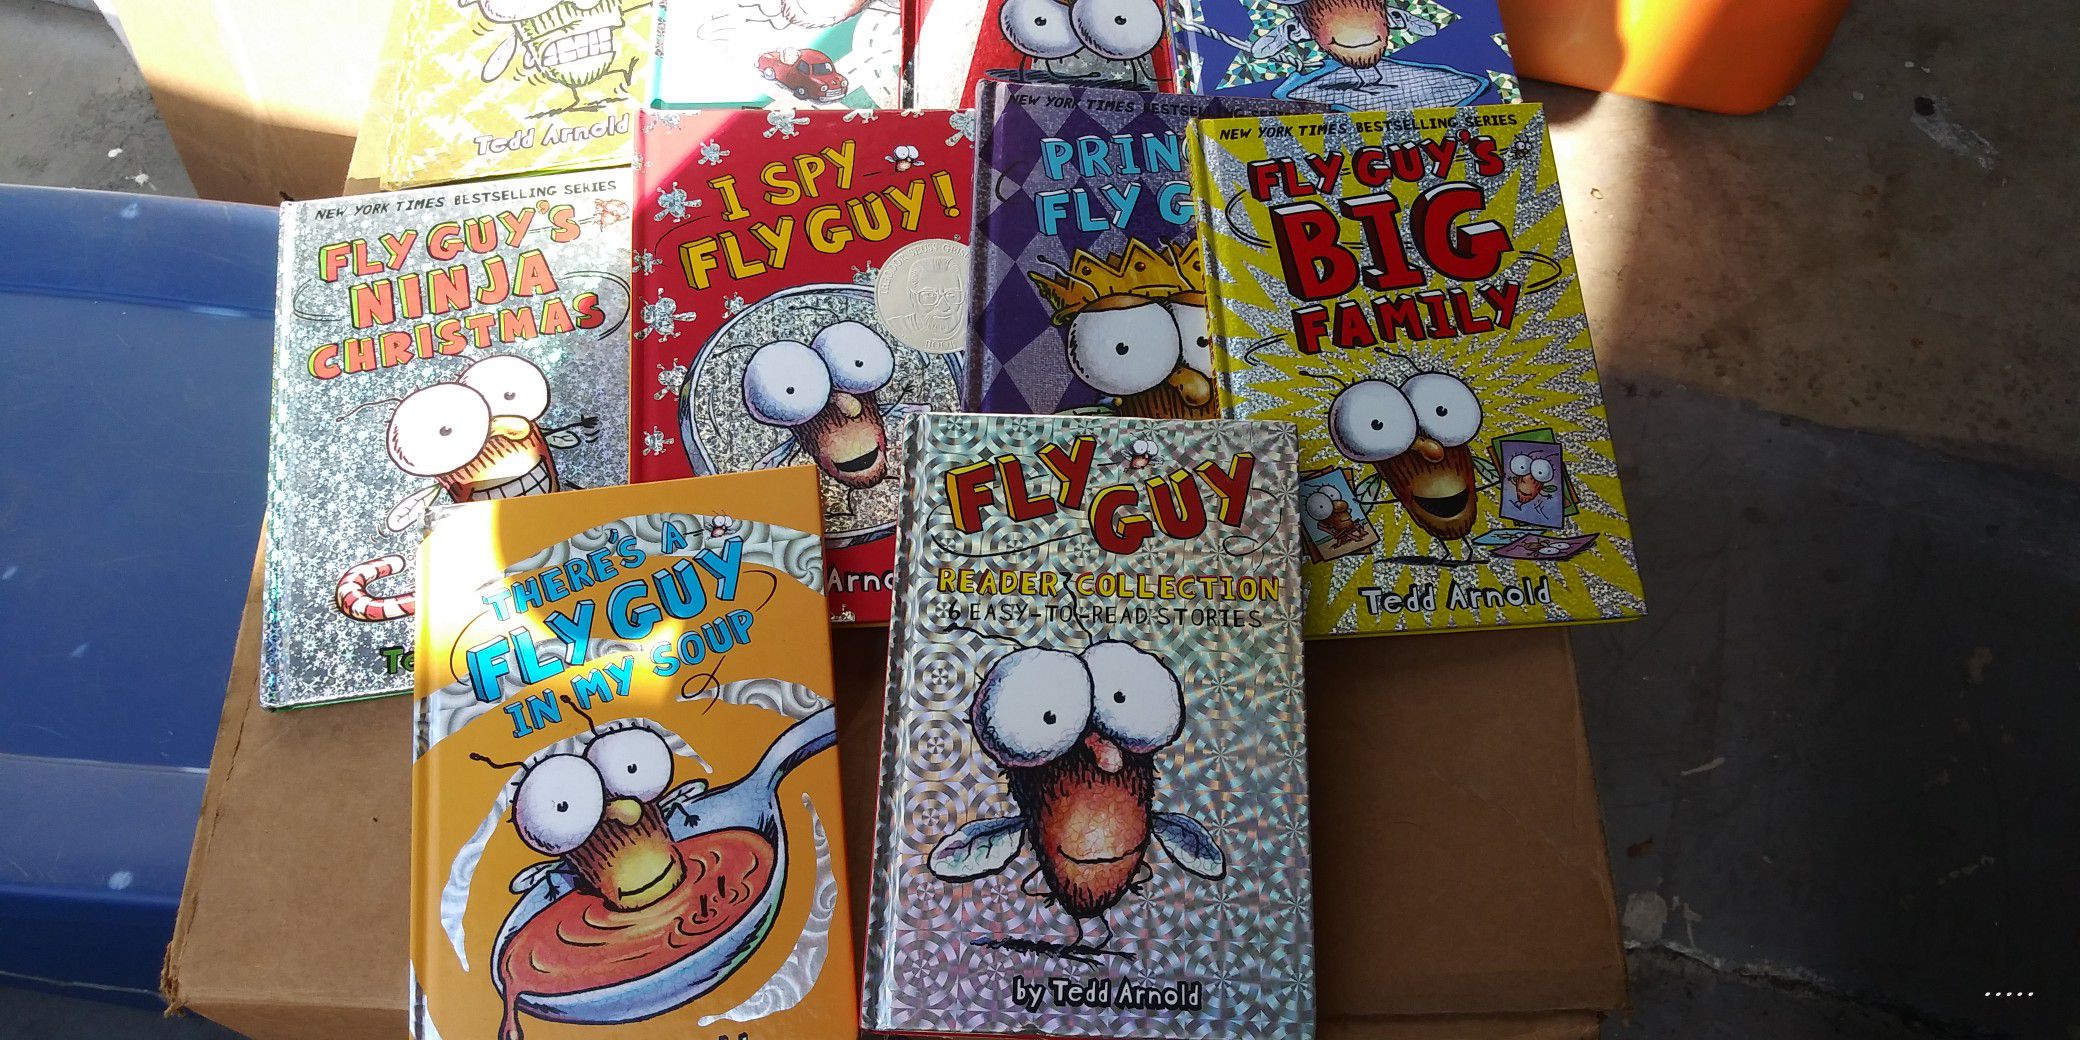 Fly Guy collection of books